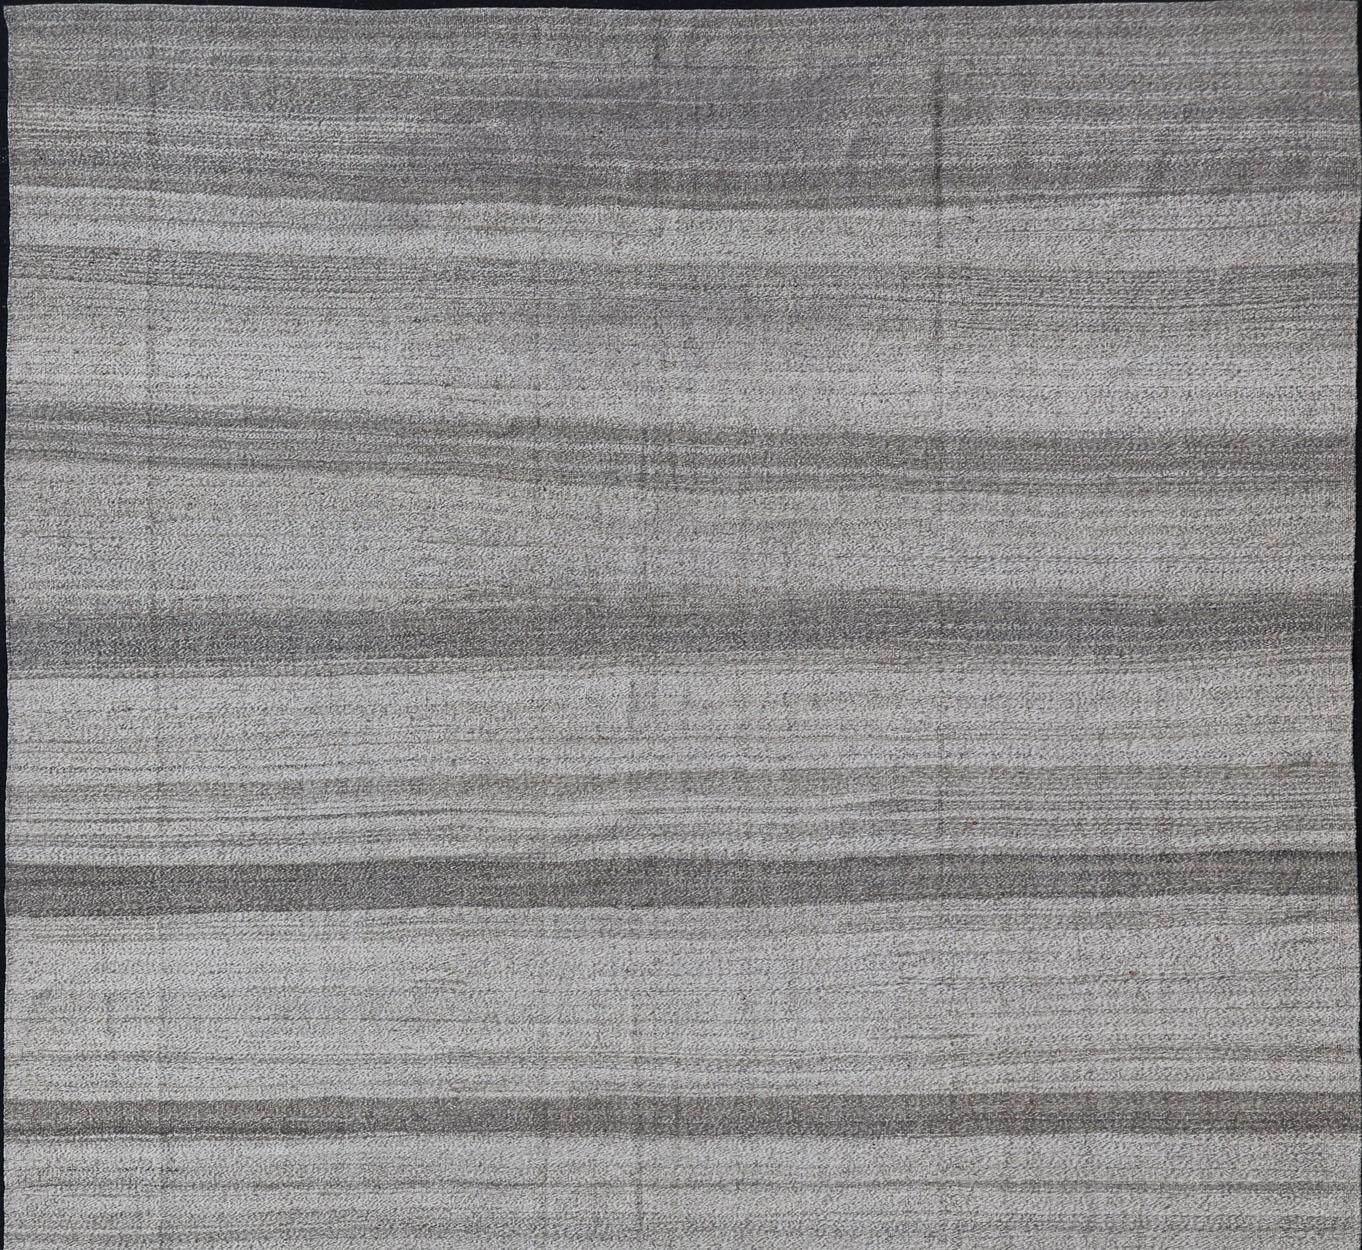 Afghan  Modern Kilim Rug with Stripes in Neutral tones Shades of Gray  For Sale